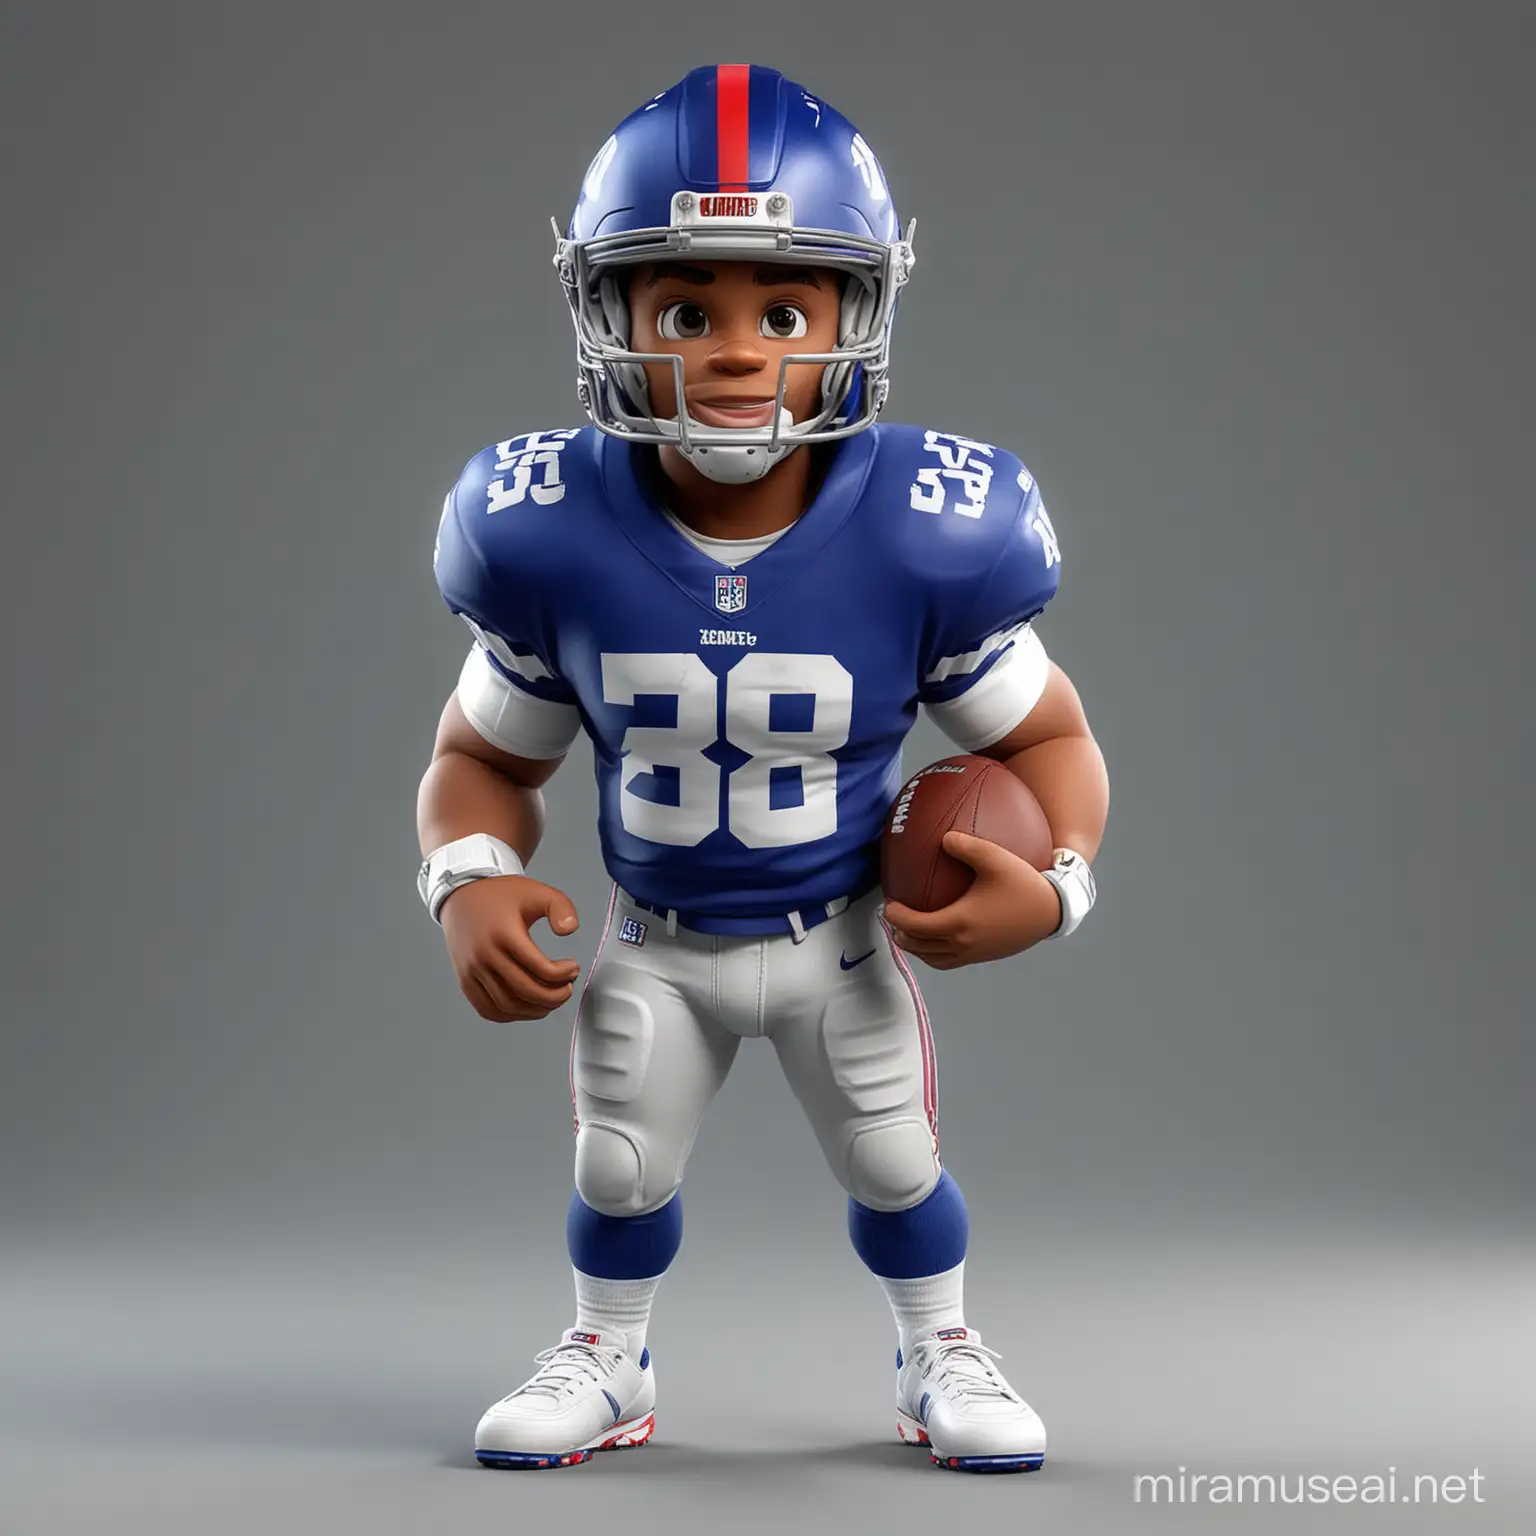 a cute 3d rendered nfl player looks like Saquon Barkley, wearing american football helmet and New York Giants kit, standing pose, cartoon style